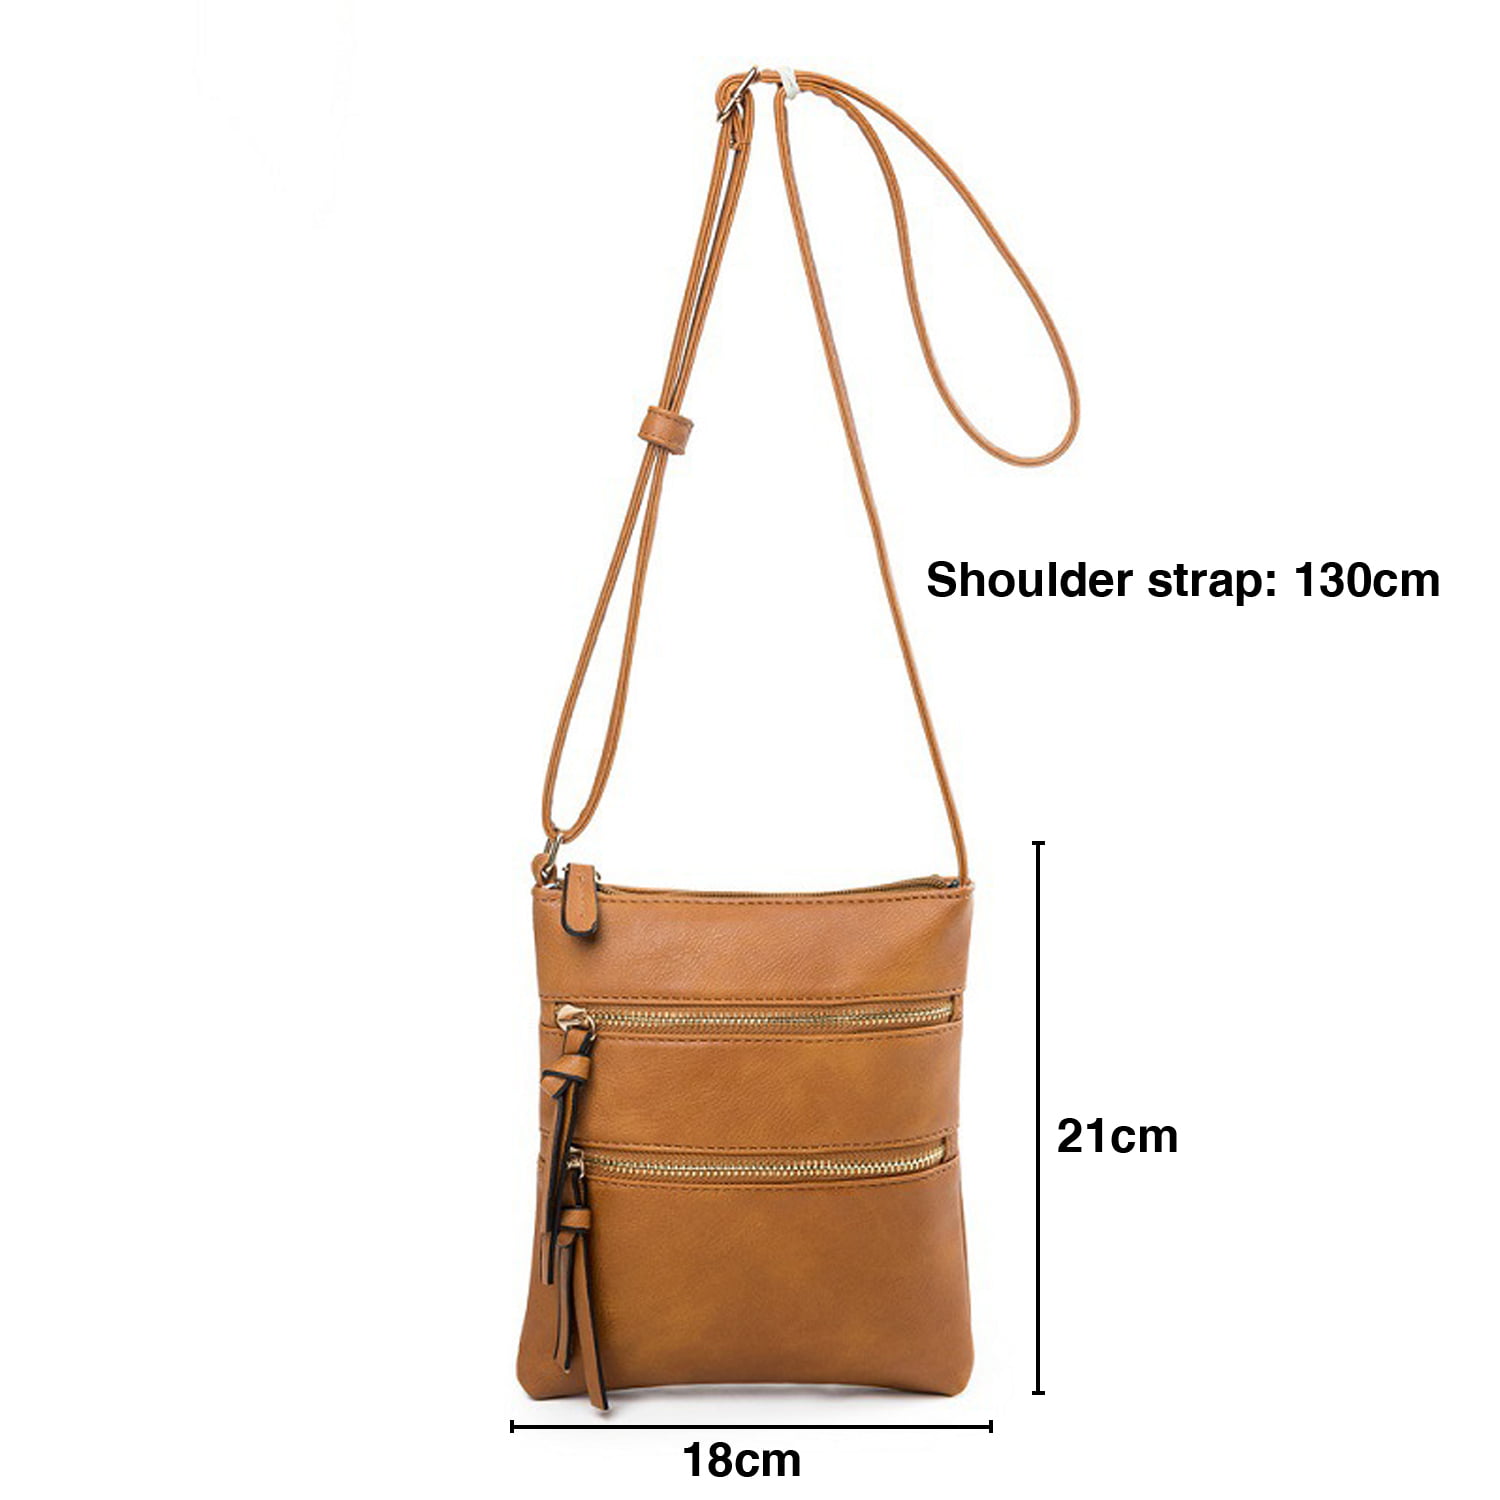 Luxury Designer Crossbody Myntra Handbags With C Letter Print, Leather  Accents, And Braided Shoulder Strap For Women Trendy Tabby Shoulders  Messenger Bag From Nxyshoebag, $58.72 | DHgate.Com